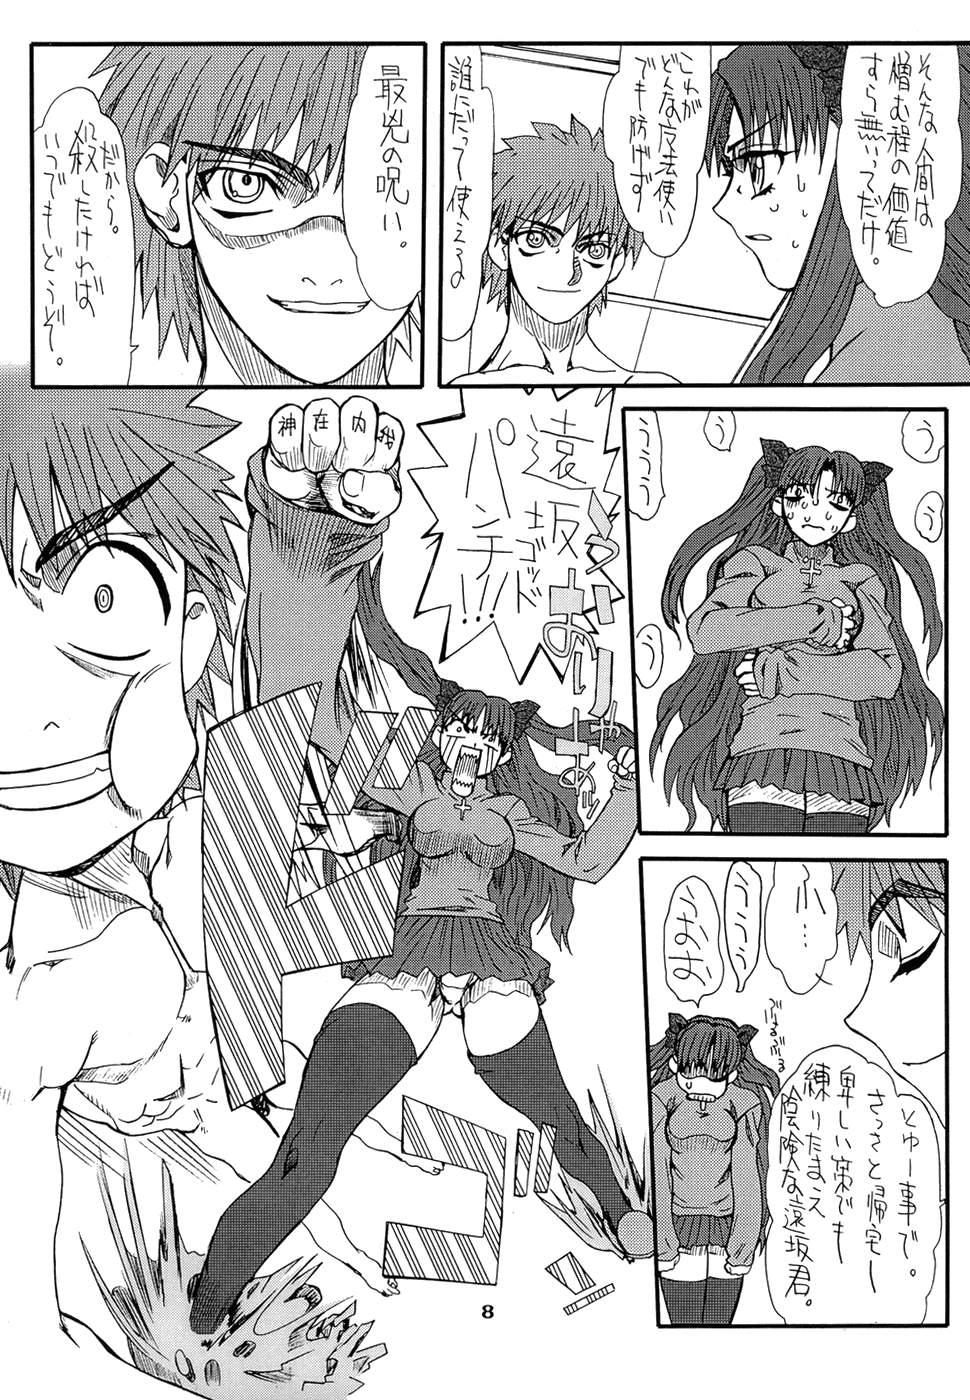 Domina Akihime San - Fate stay night Doll - Page 8